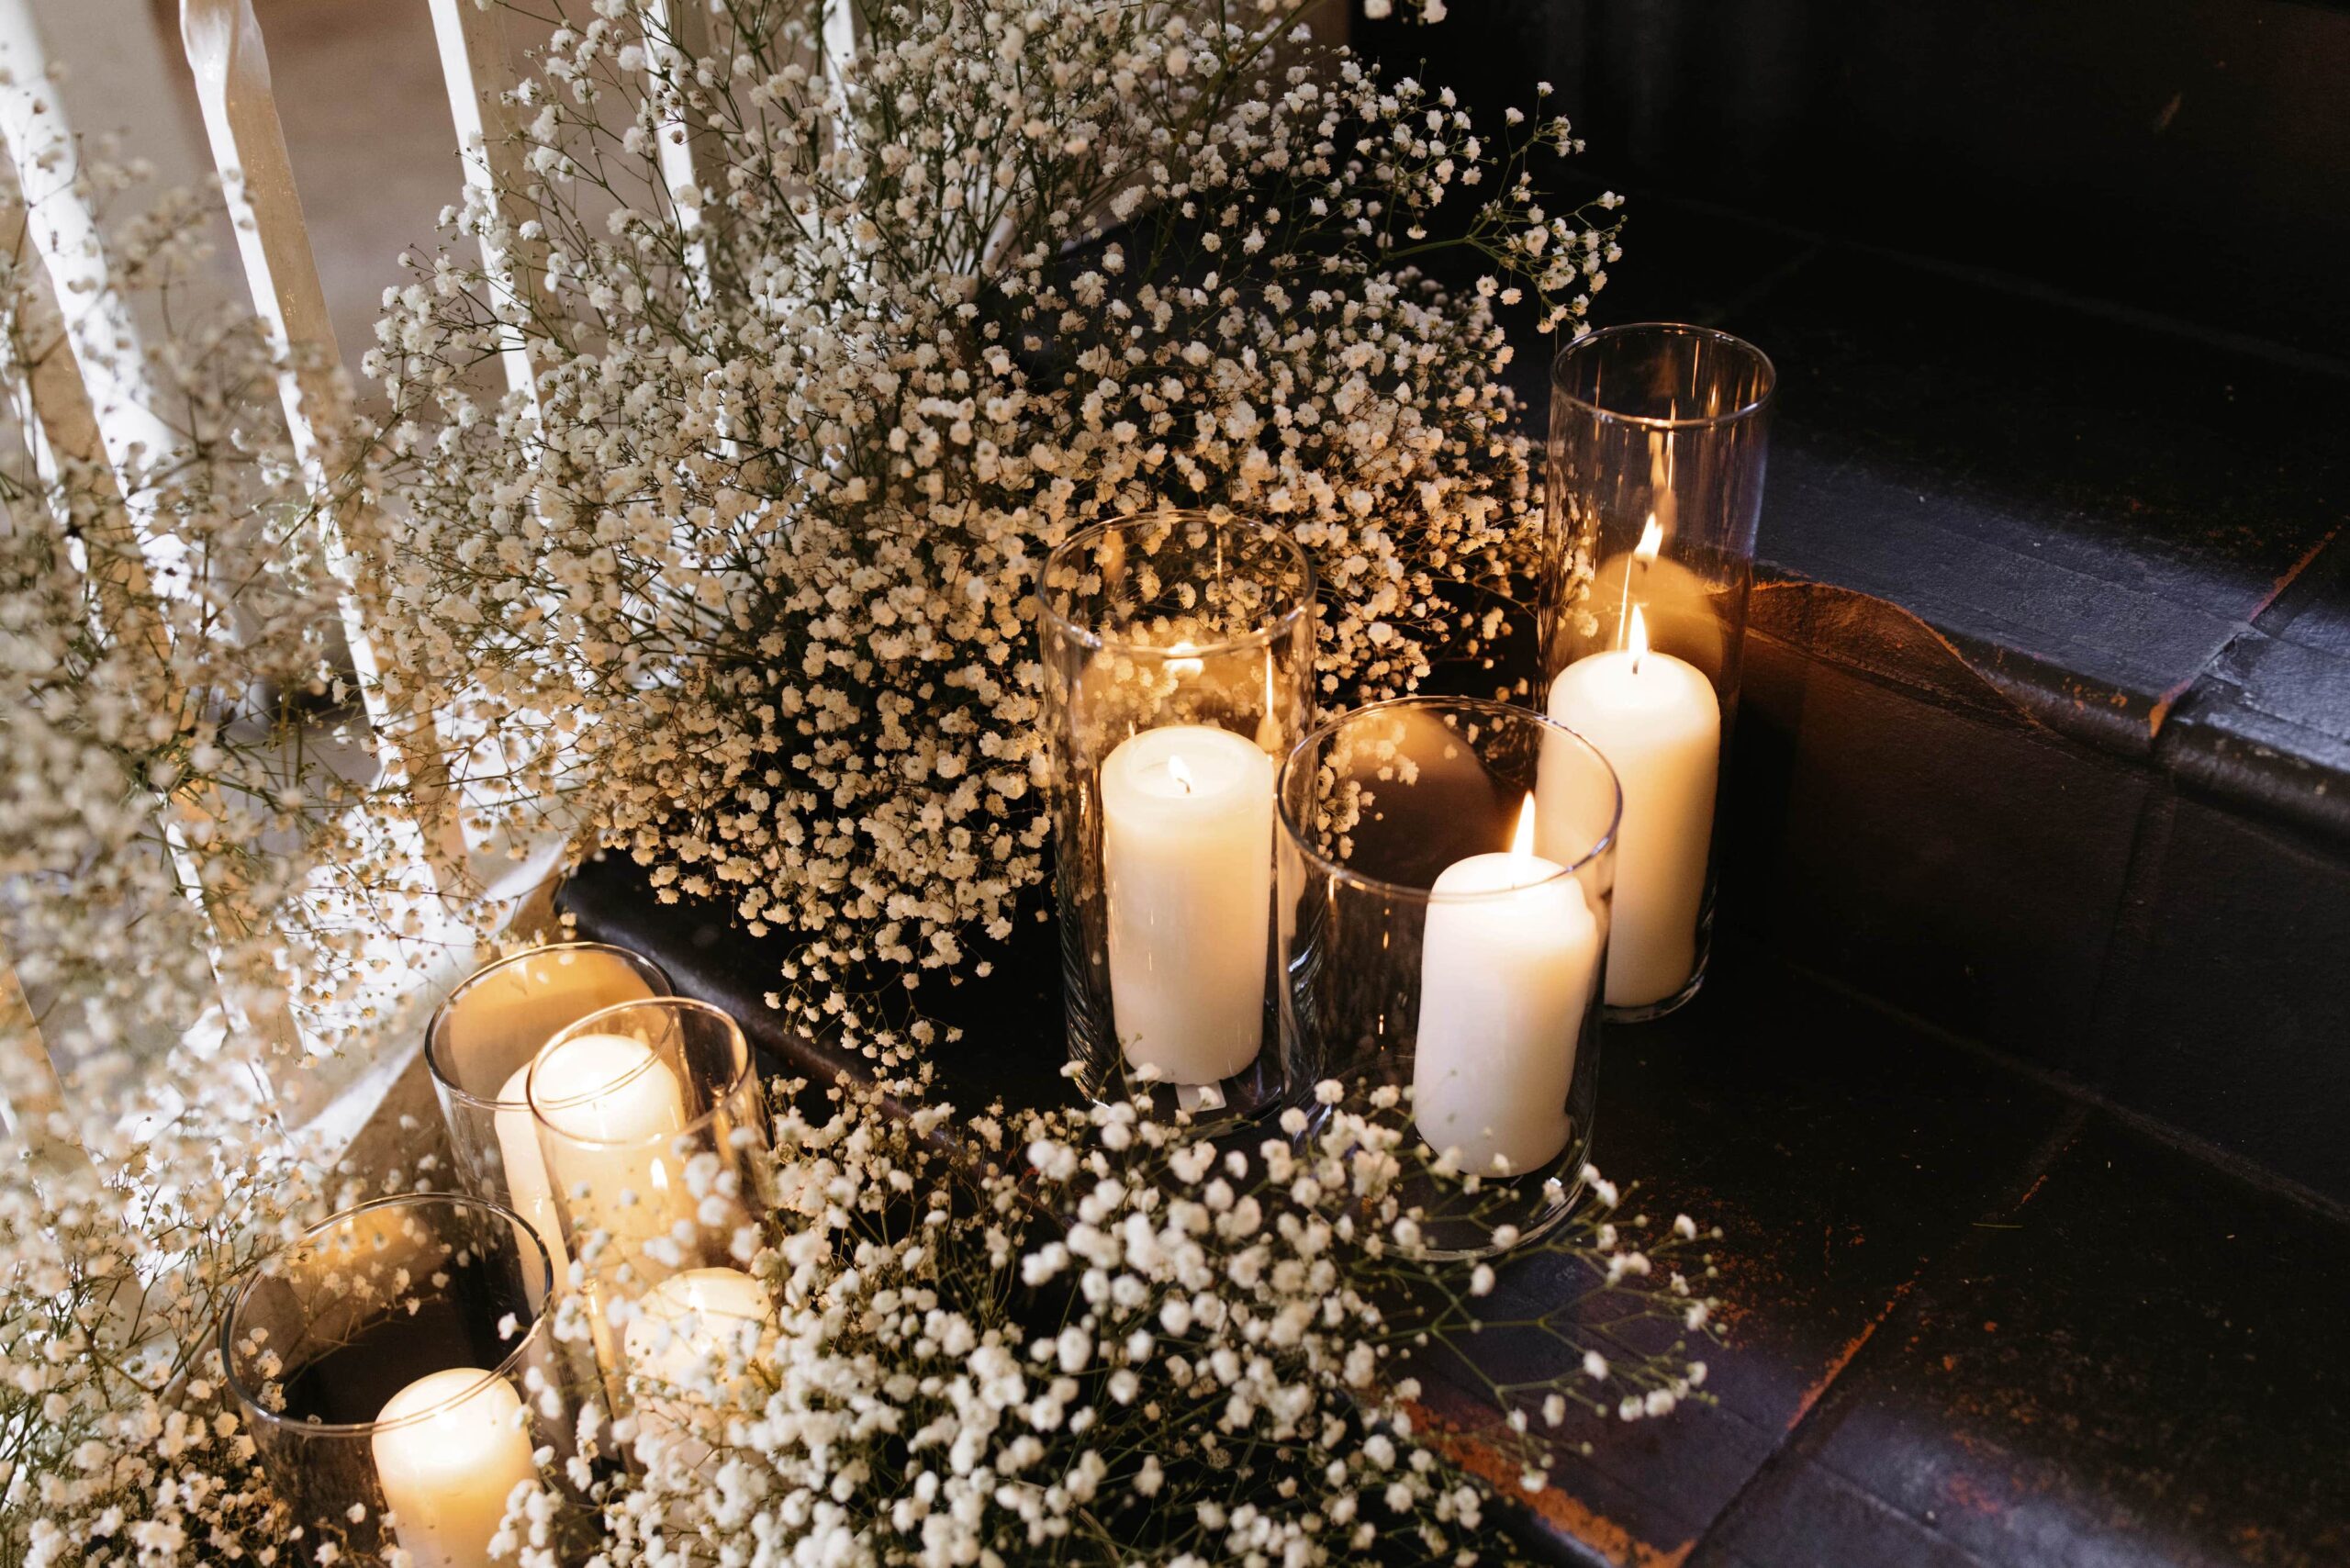 Candles and baby's breath plant scattered along the sides of the staircase.